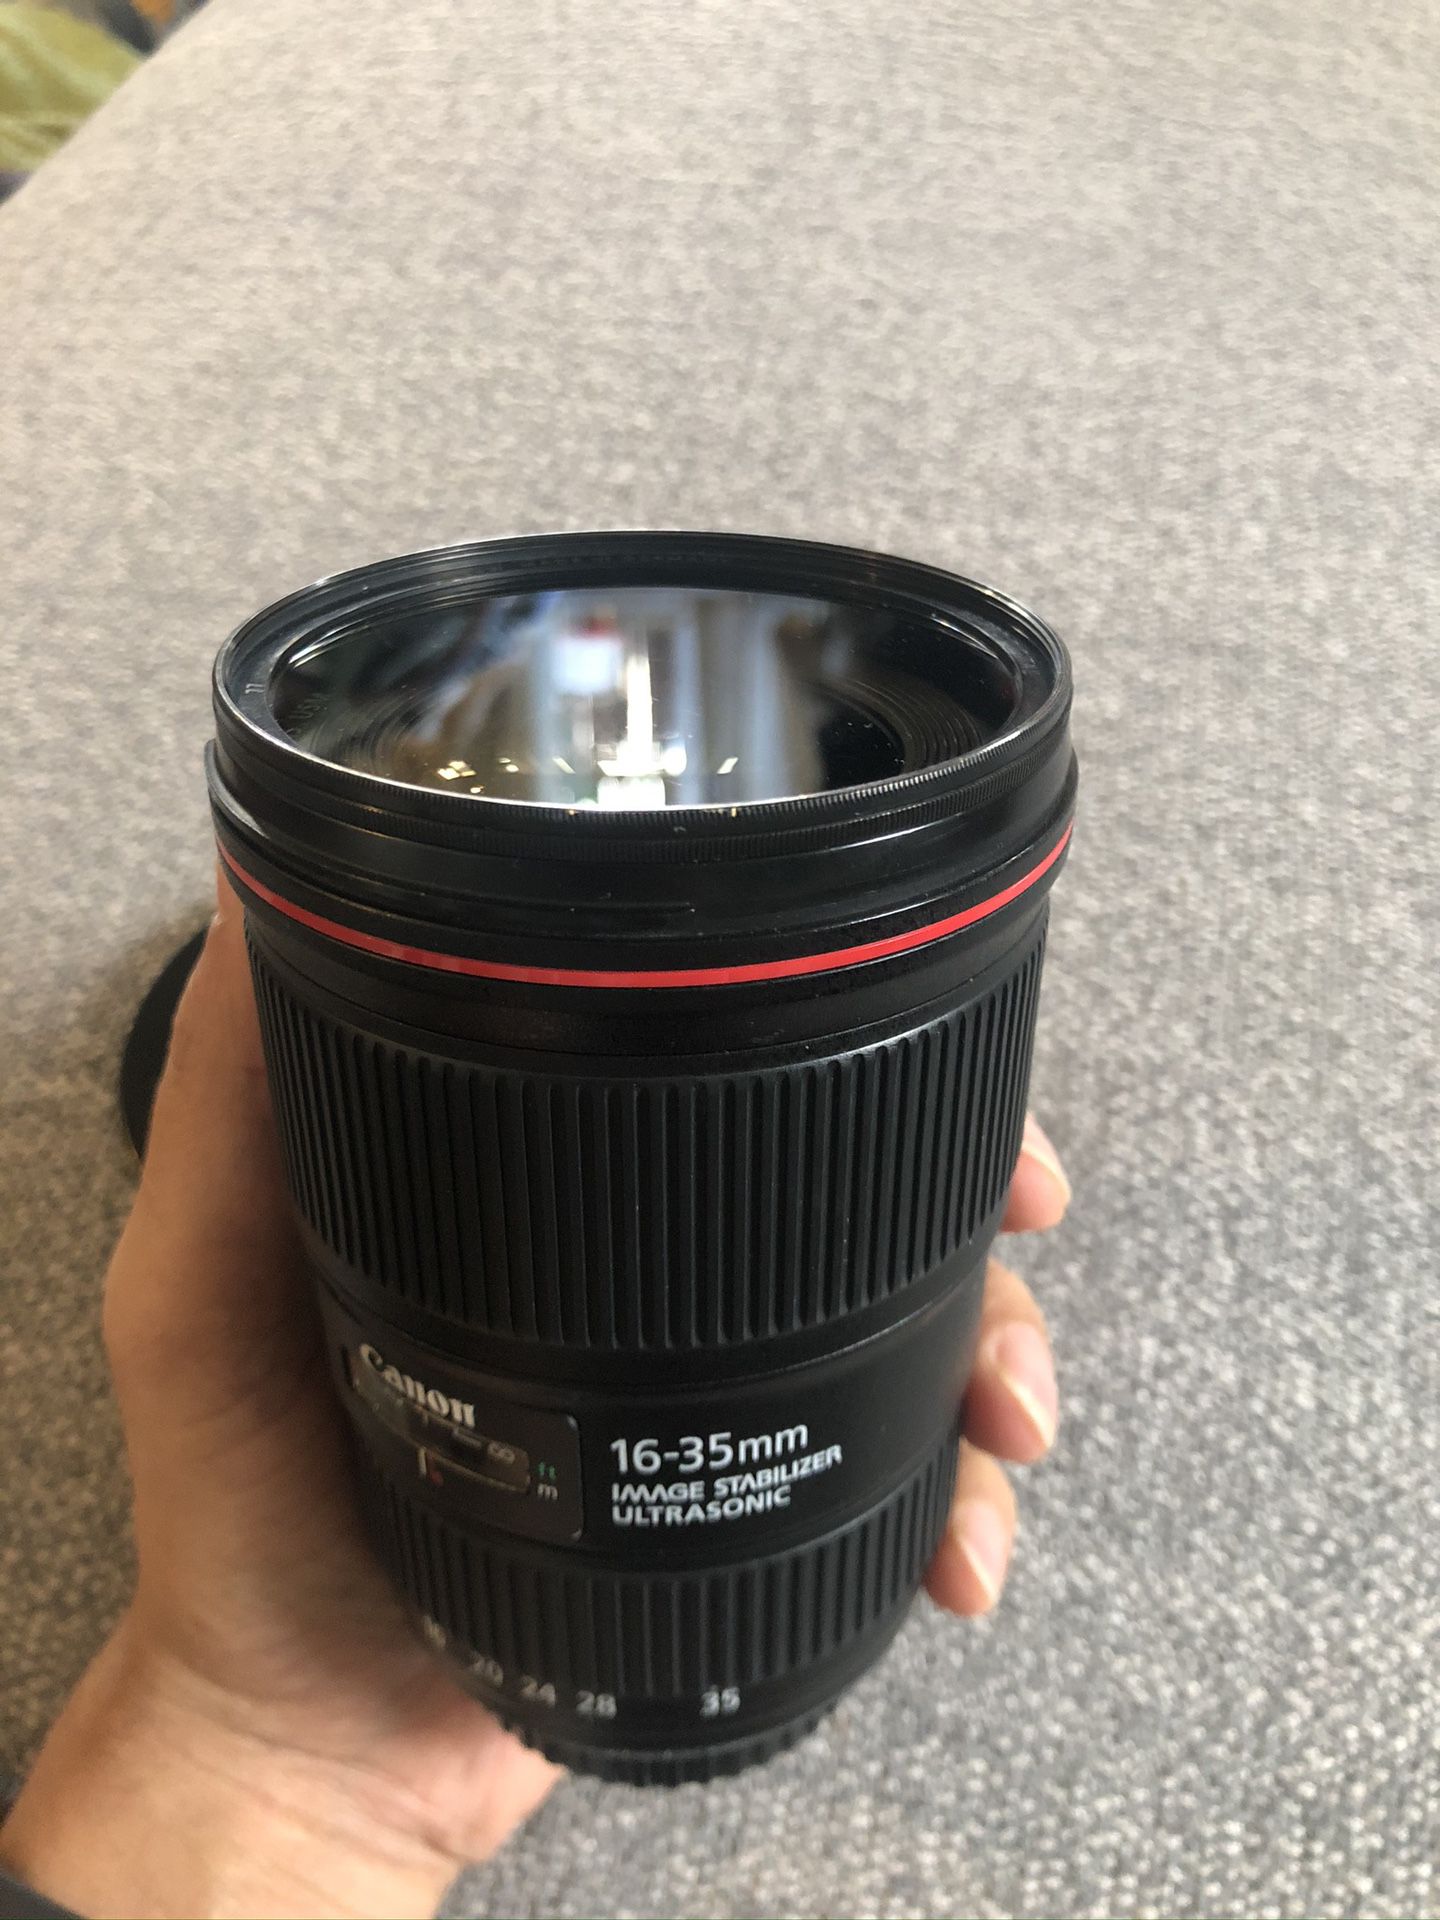 Canon 16-35 mm F4 lens with $129 BW filter